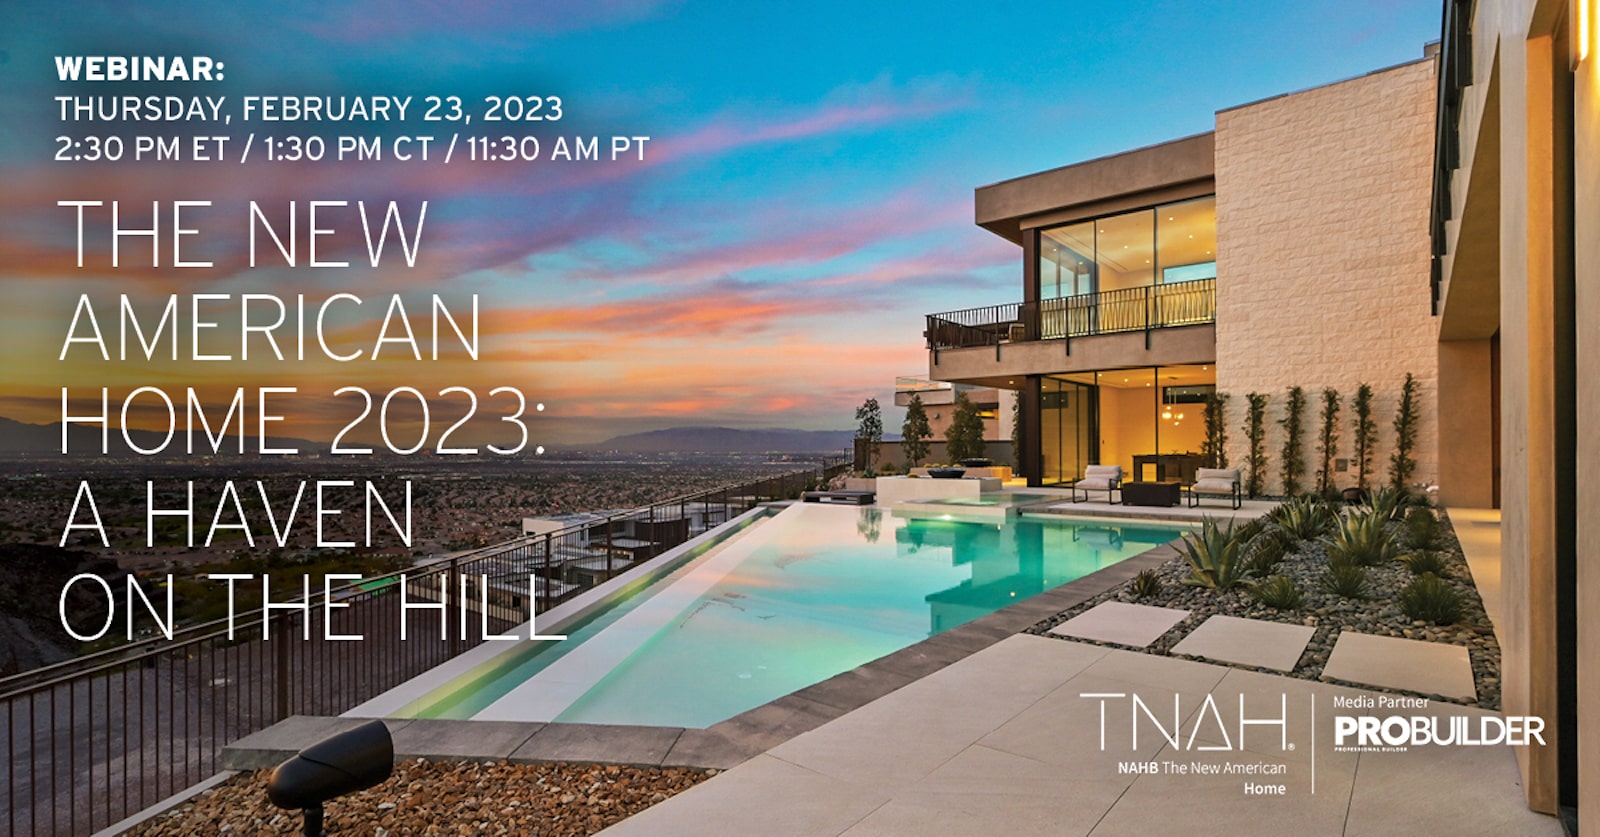 On-Demand Webinar about the interrors of The New American Home 2023